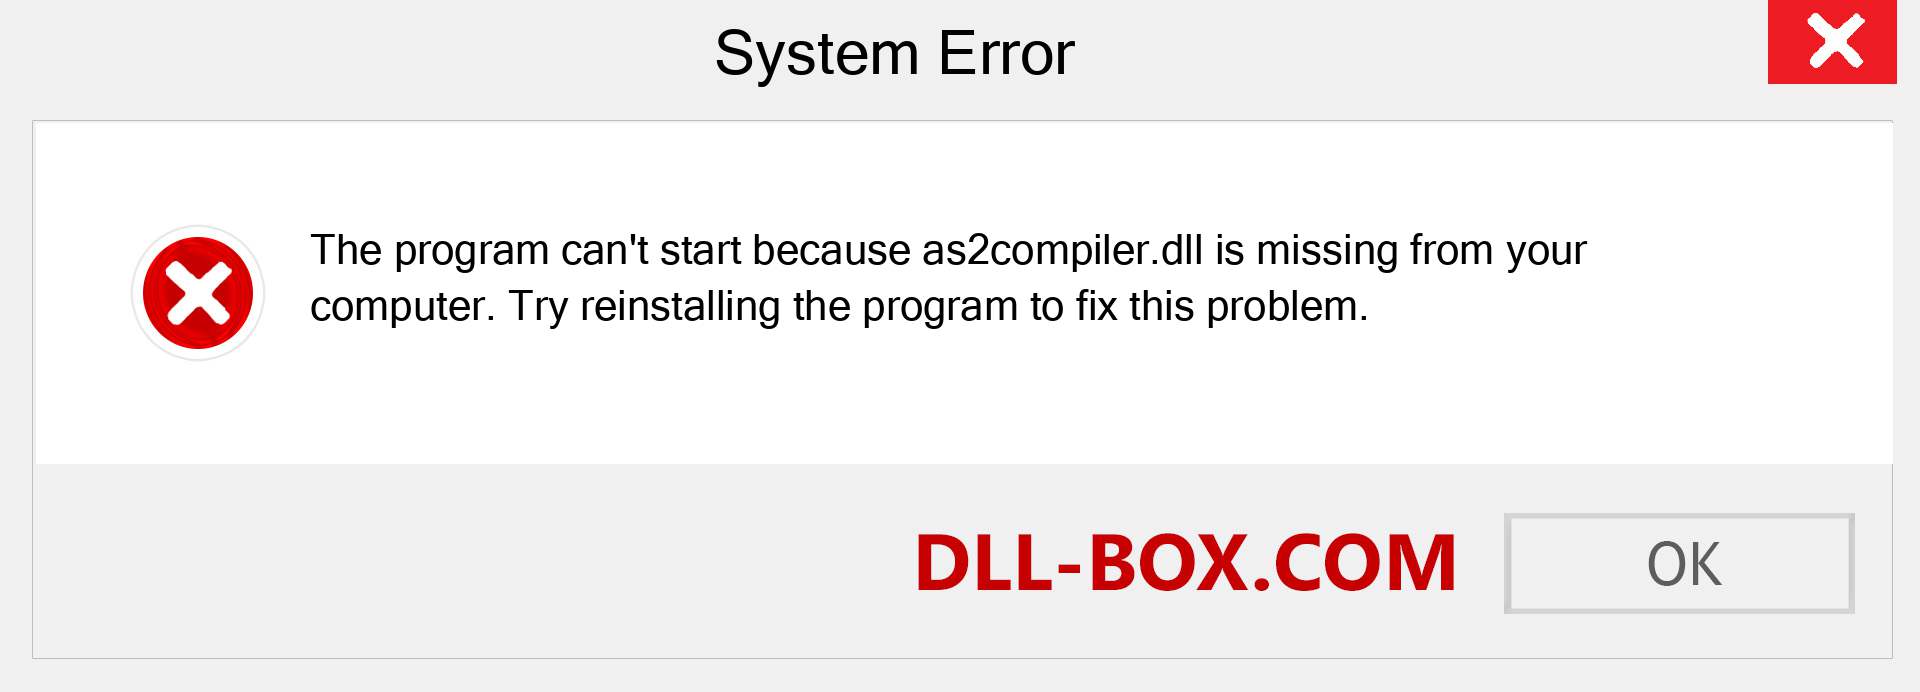  as2compiler.dll file is missing?. Download for Windows 7, 8, 10 - Fix  as2compiler dll Missing Error on Windows, photos, images